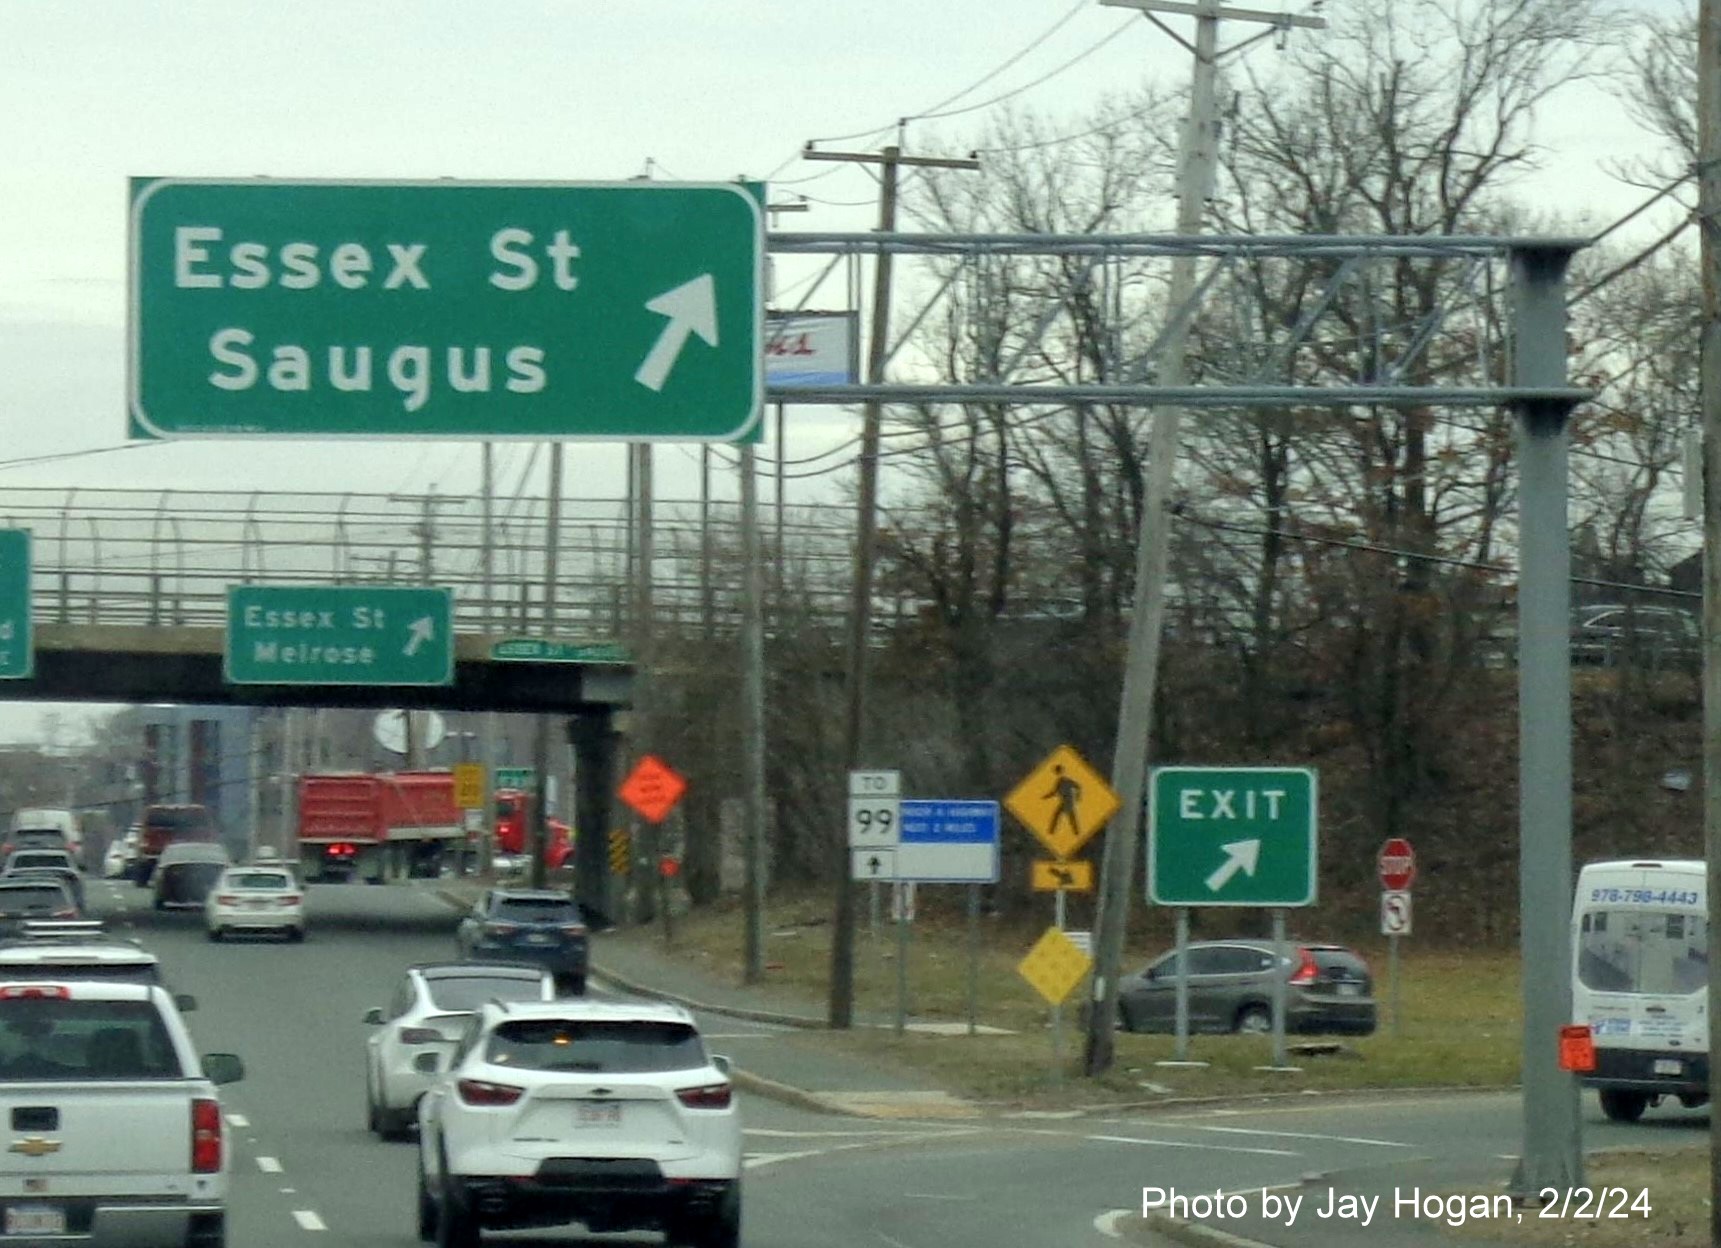 Image of recently placed overhead ramp sign for Essex Street exits on US 1 North in Saugus, by Kevin Manfra, February 2024